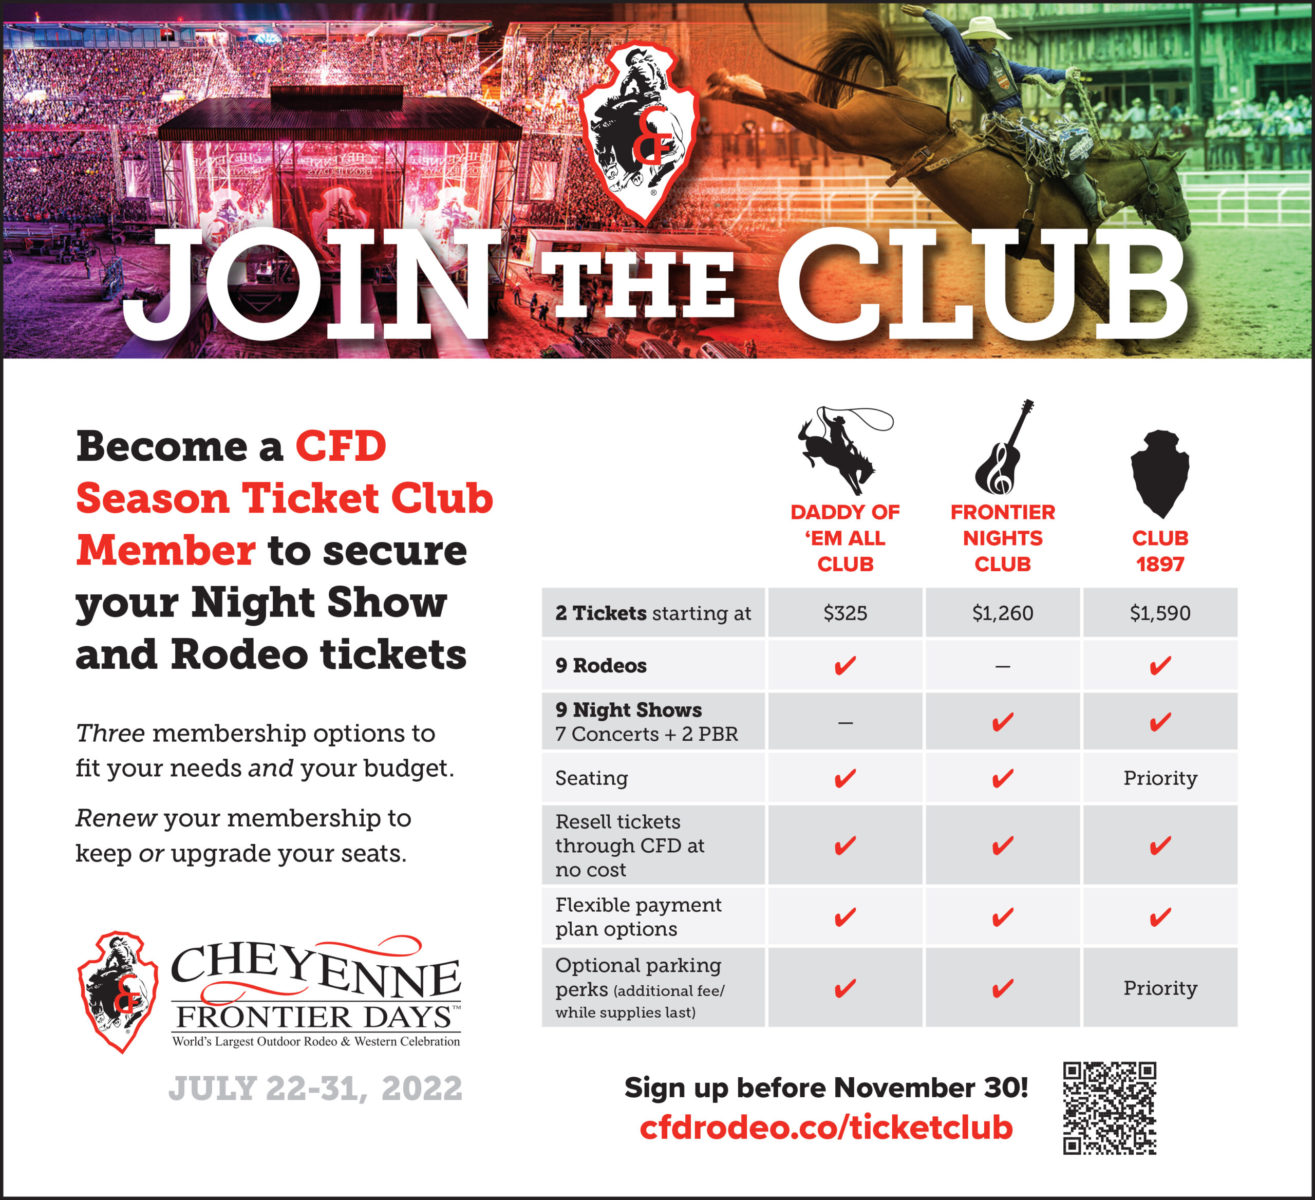 CFD Invites You to Join the Club